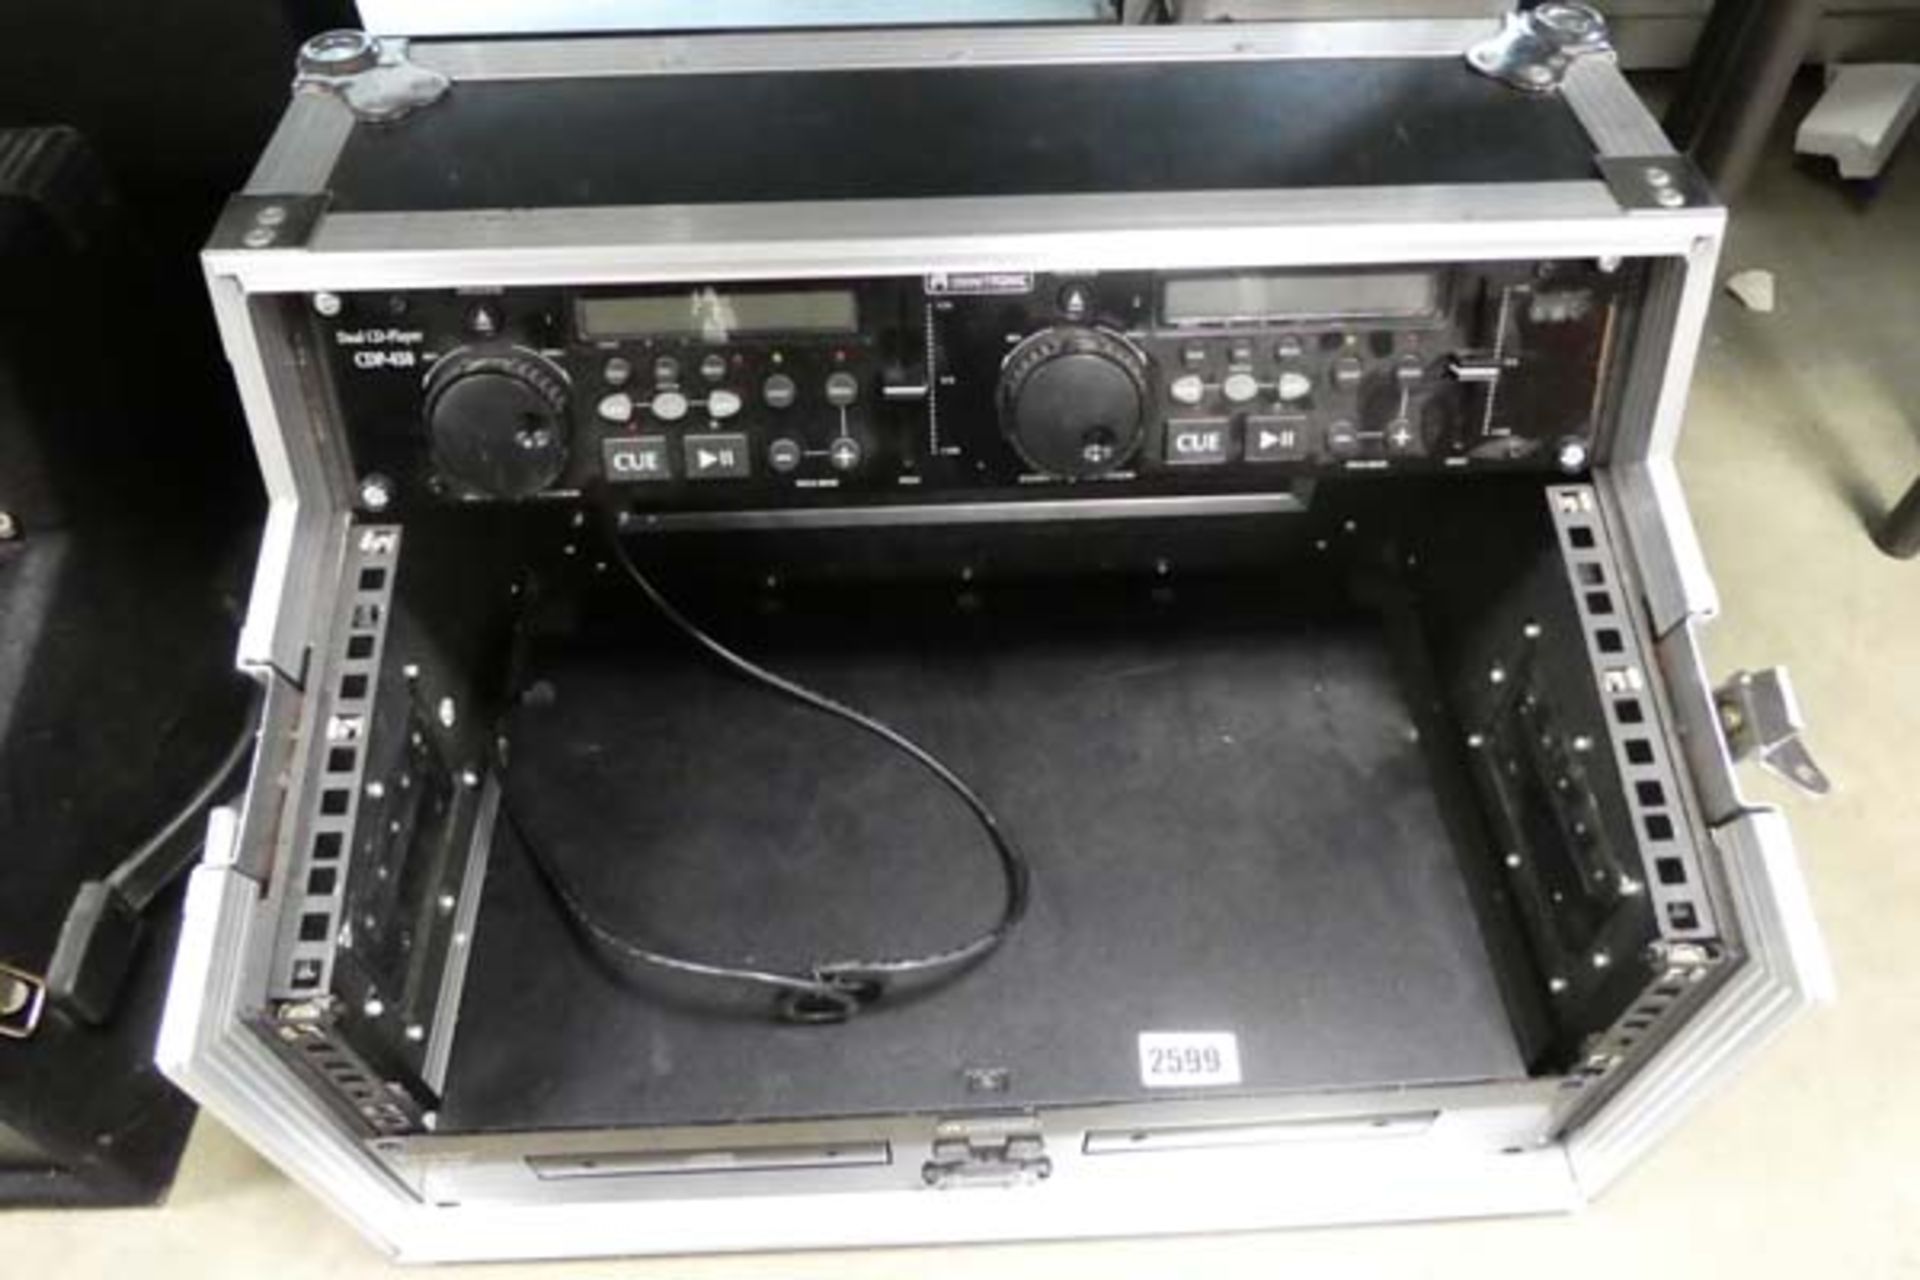 Omnitronic dual CD player with pitch control unit and case